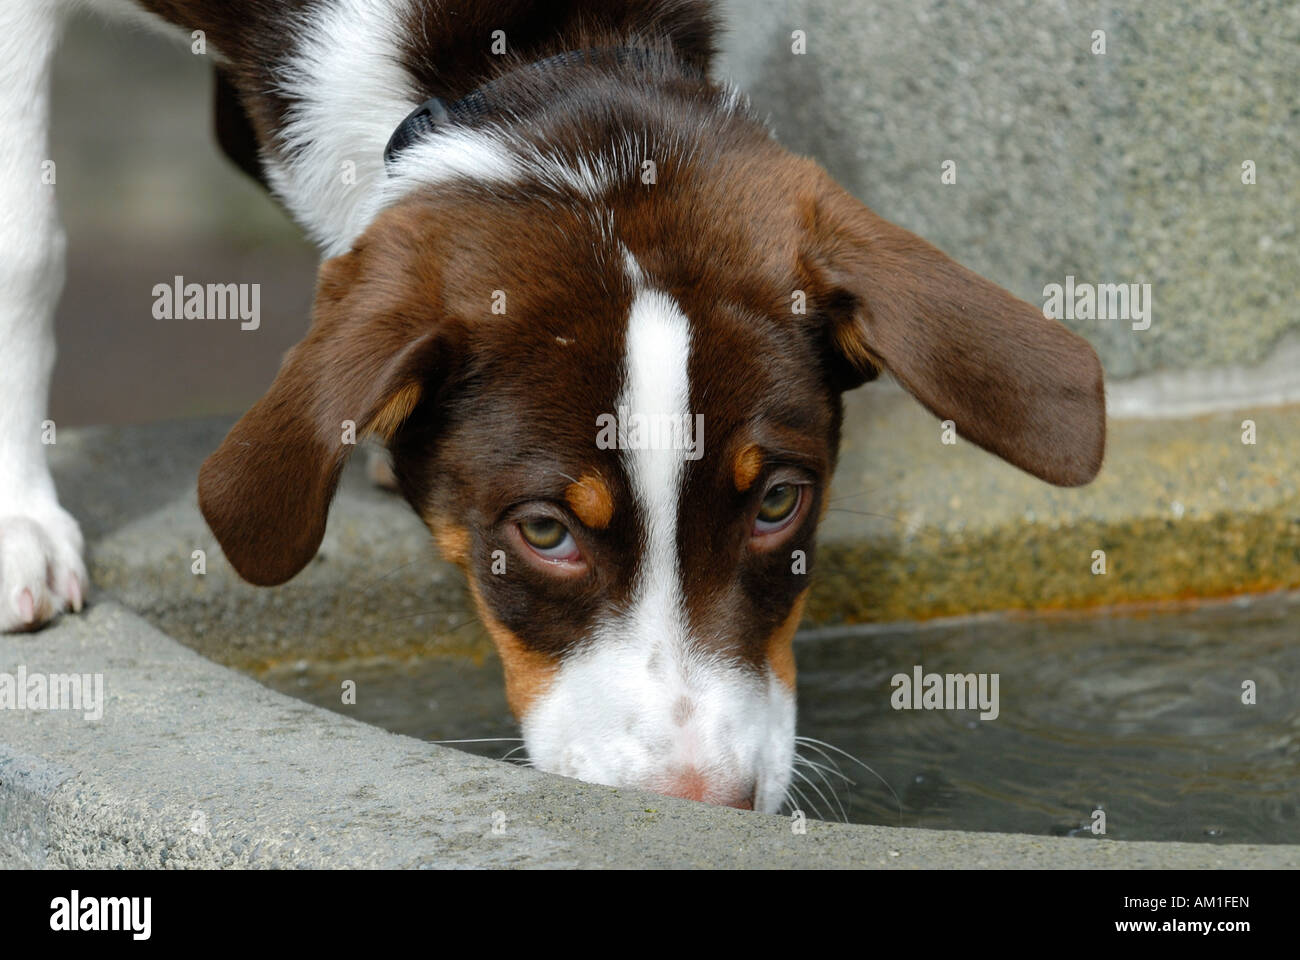 A young half-breed Dog is drinking from a well basin Stock Photo